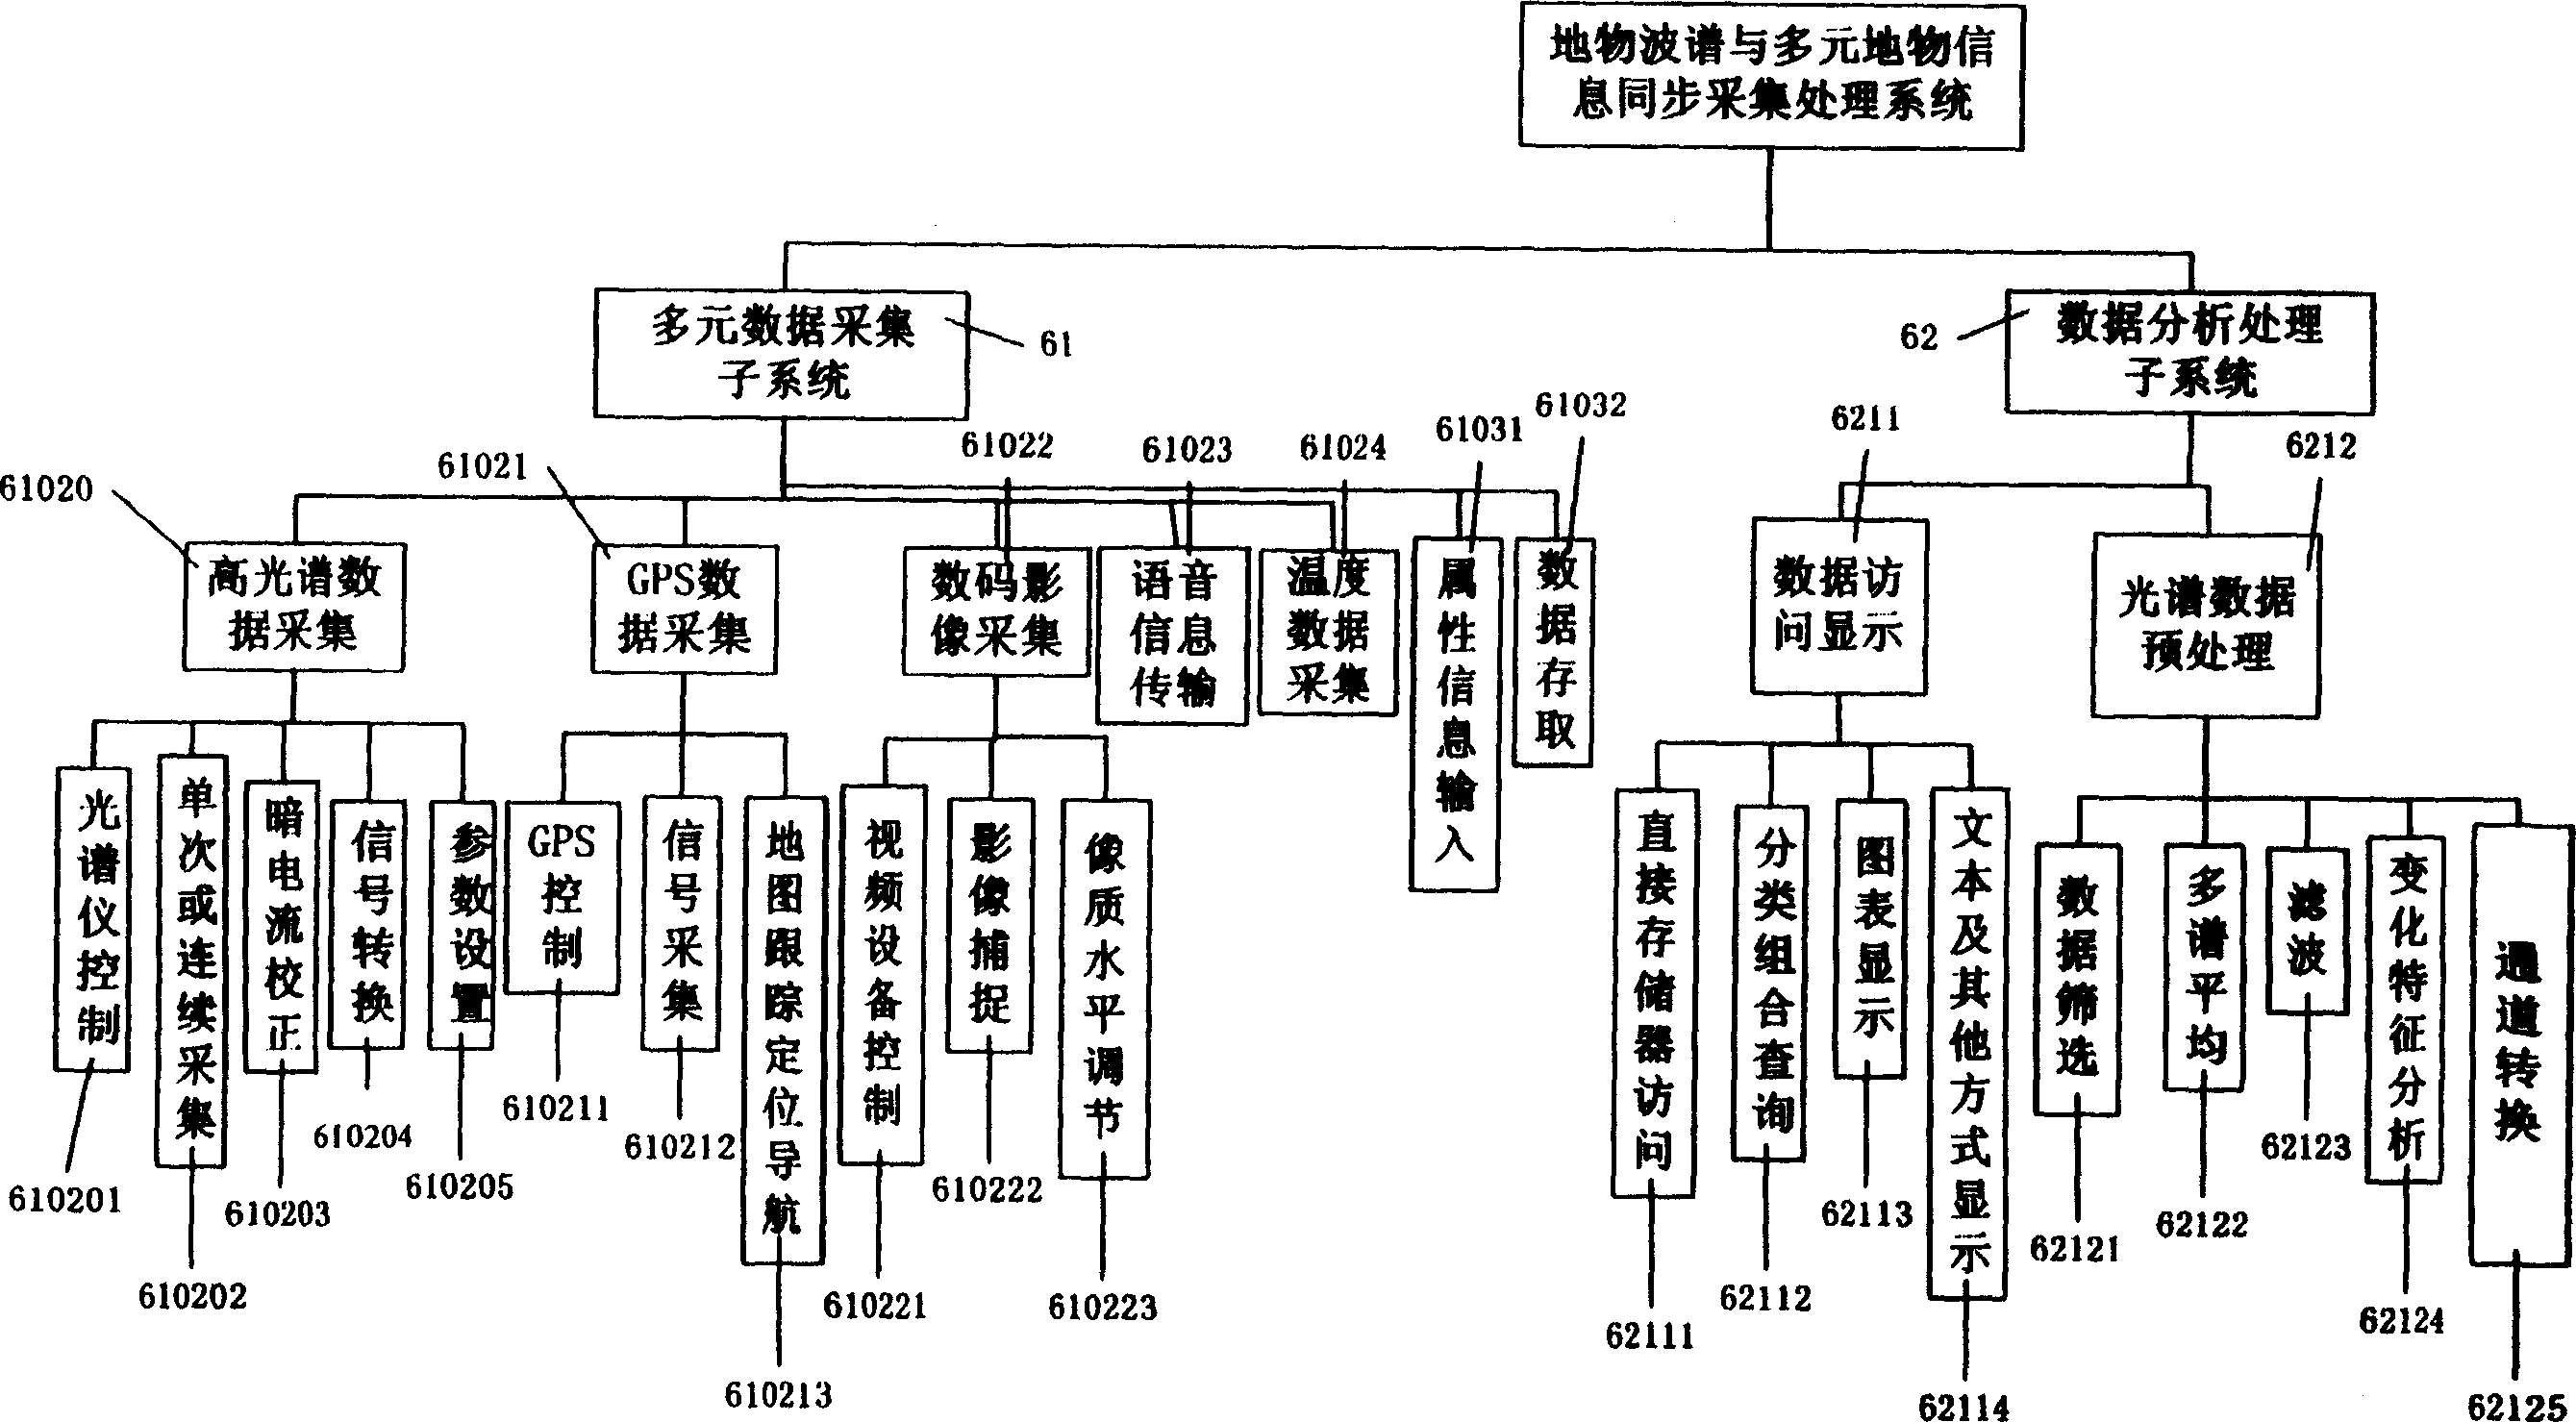 Synchronous colelcting and processing system for culture wave spectrum and poly culture information